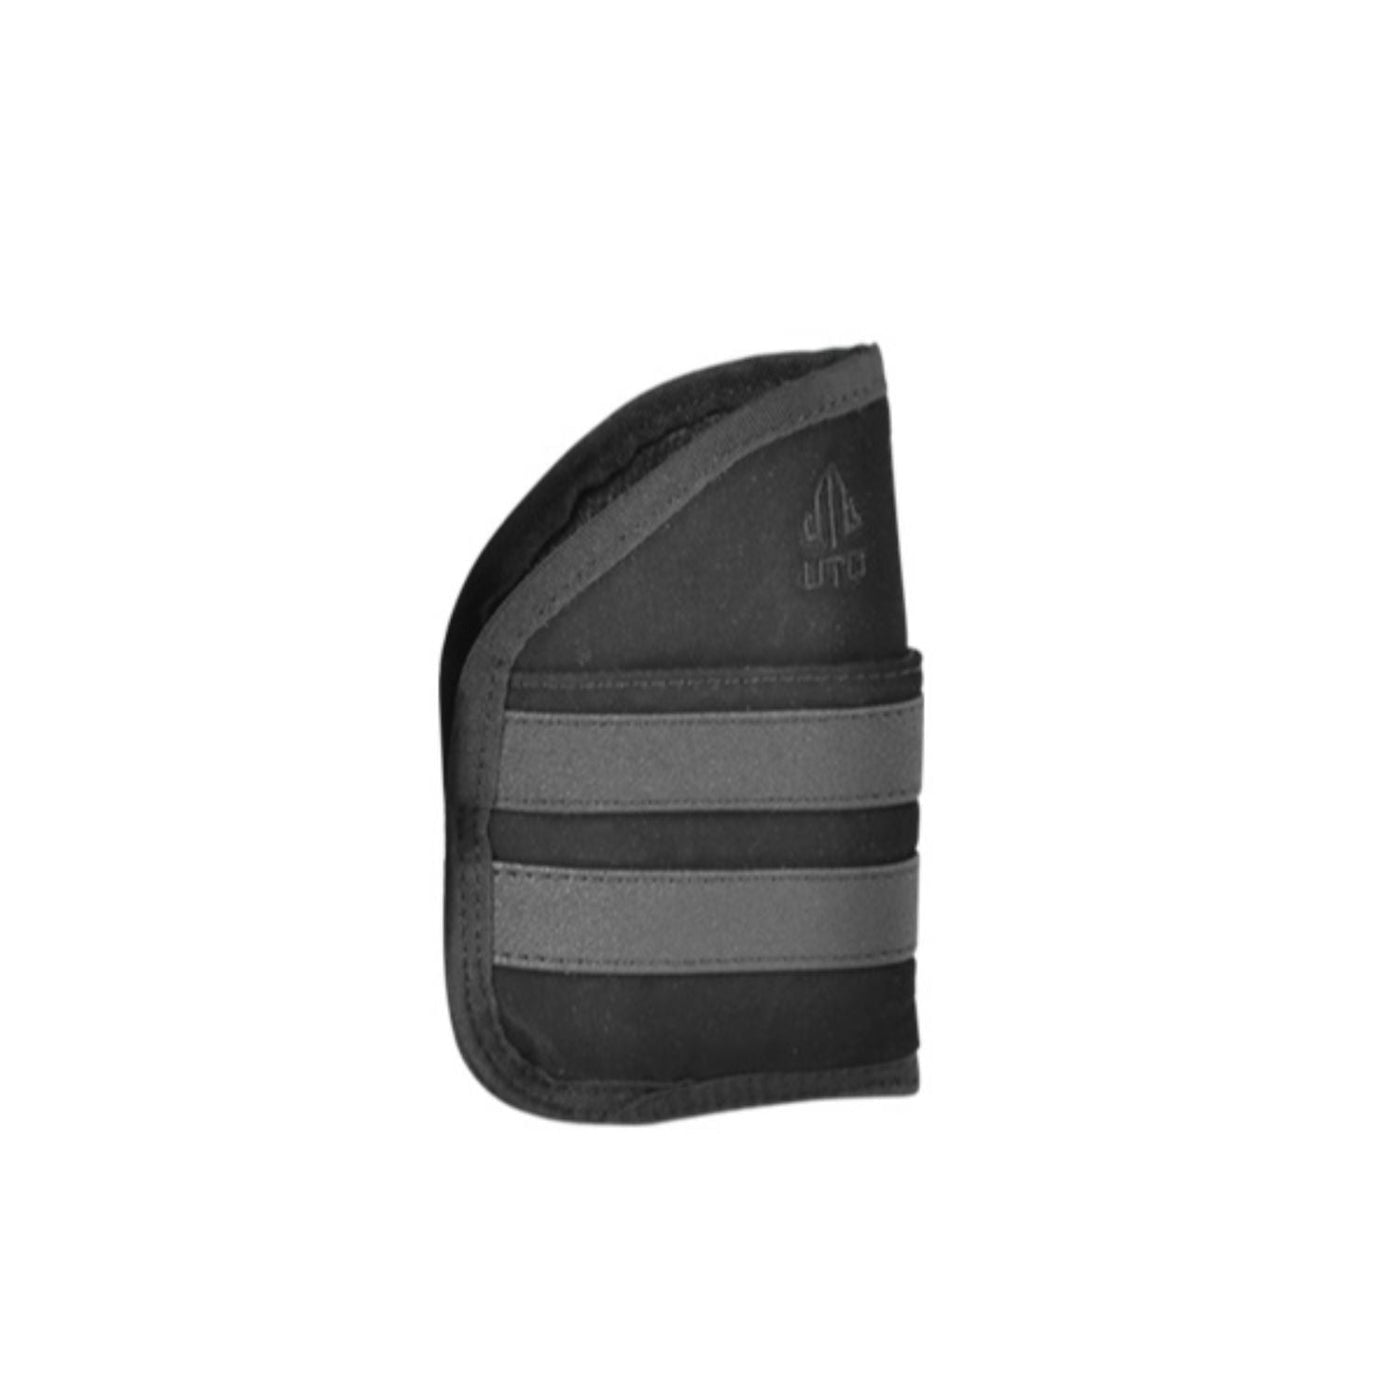 Leapers Leapers UTG 3.9in Ambidextrous Pocket Holster-Black Shooting